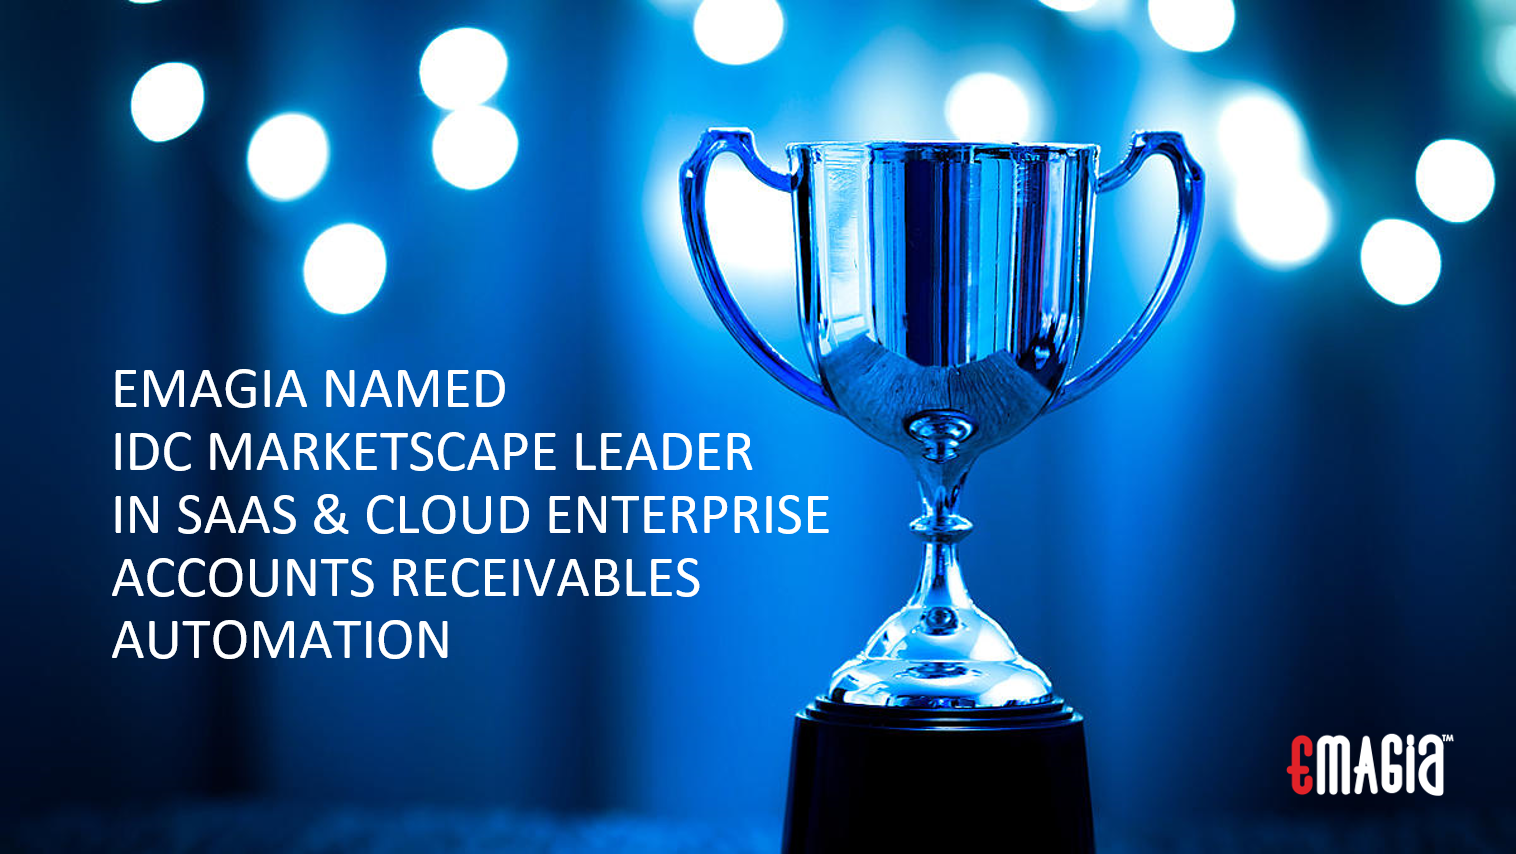 Emagia Once Again Recognized as a Market Leader in IDC’s Marketscape for Enterprise Accounts Receivables Automation Applications